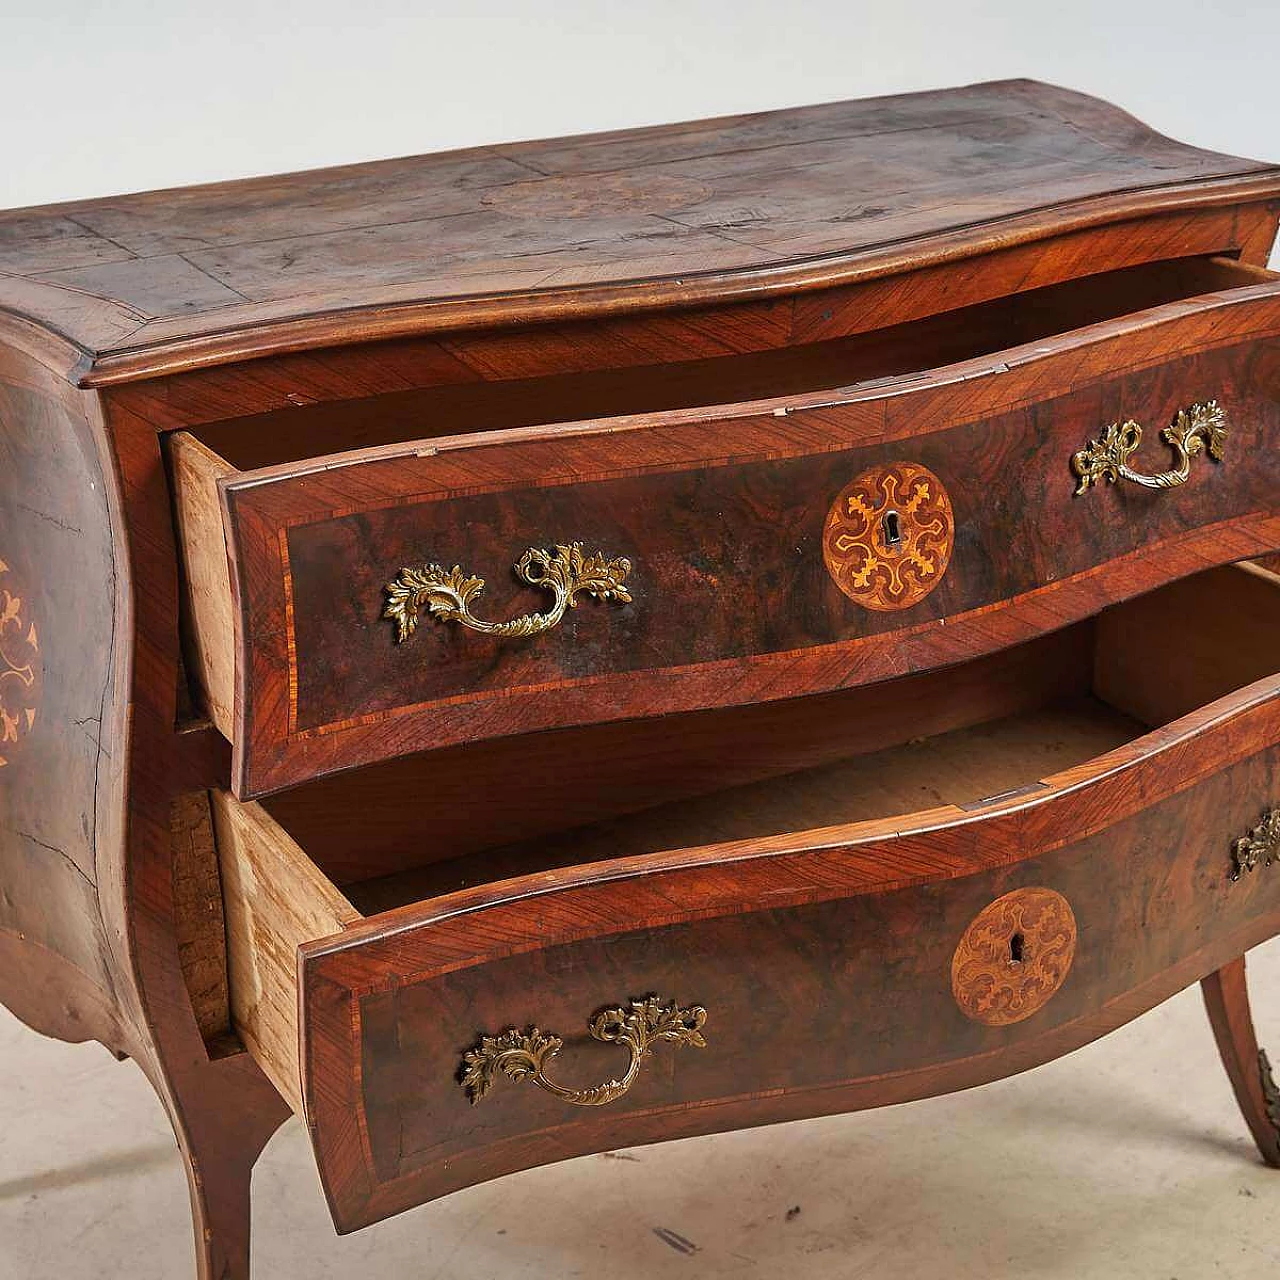 Two-drawer wooden moved dresser with inlay decoration, 19th century 8